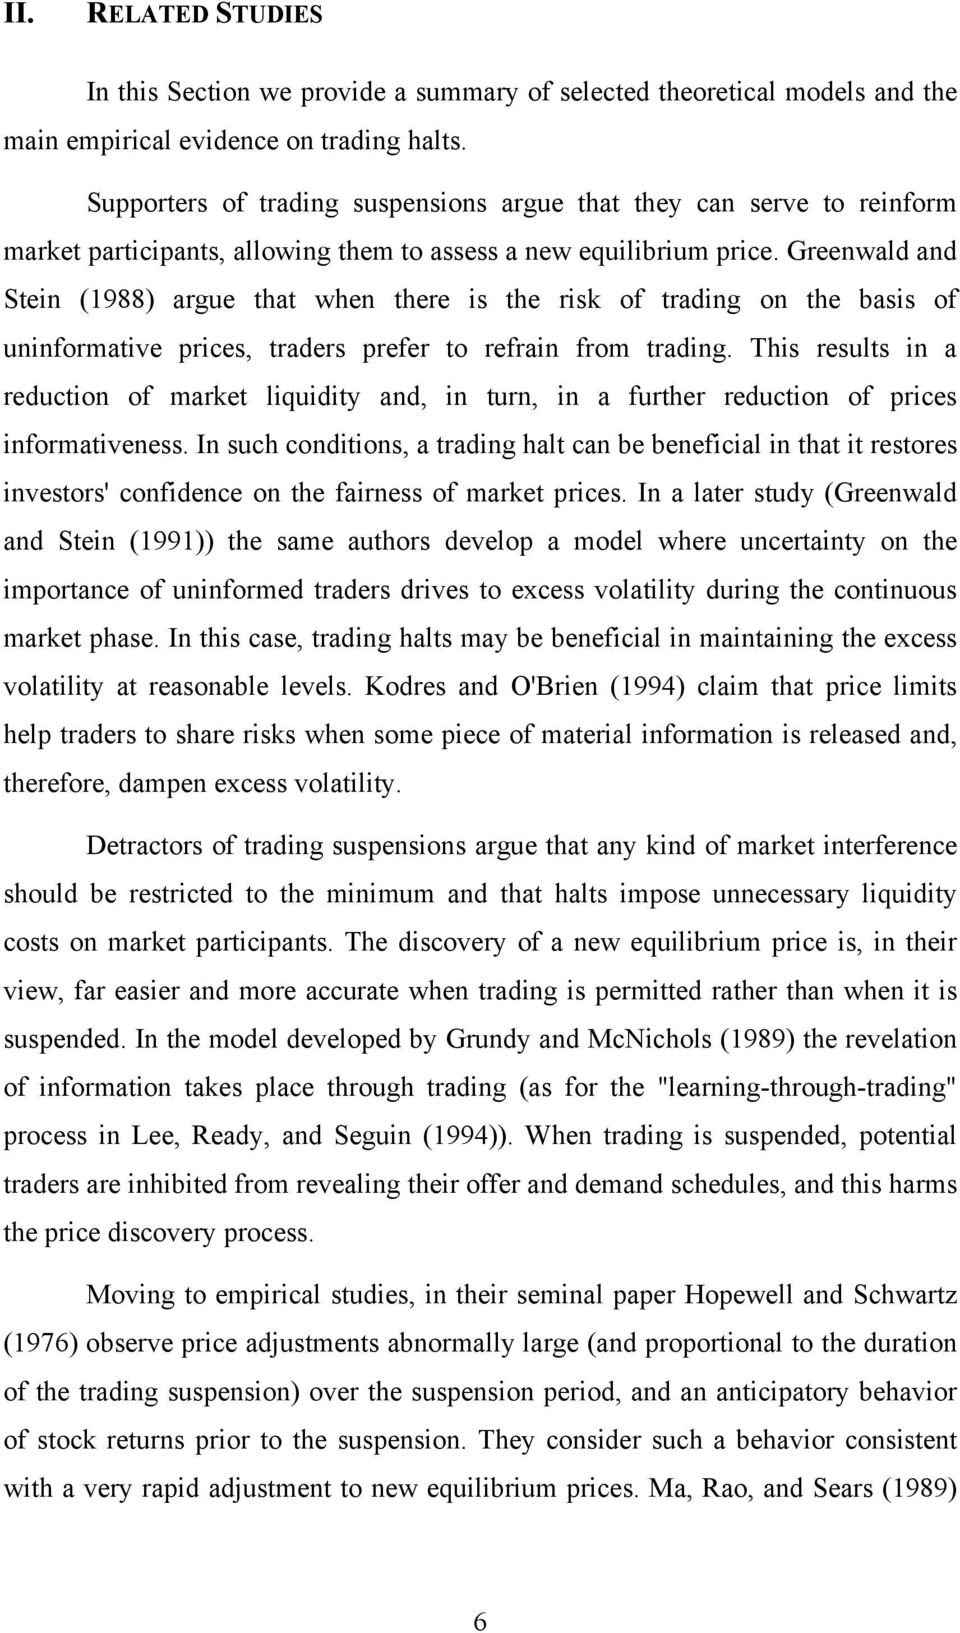 Greenwald and Stein (1988) argue that when there is the risk of trading on the basis of uninformative prices, traders prefer to refrain from trading.